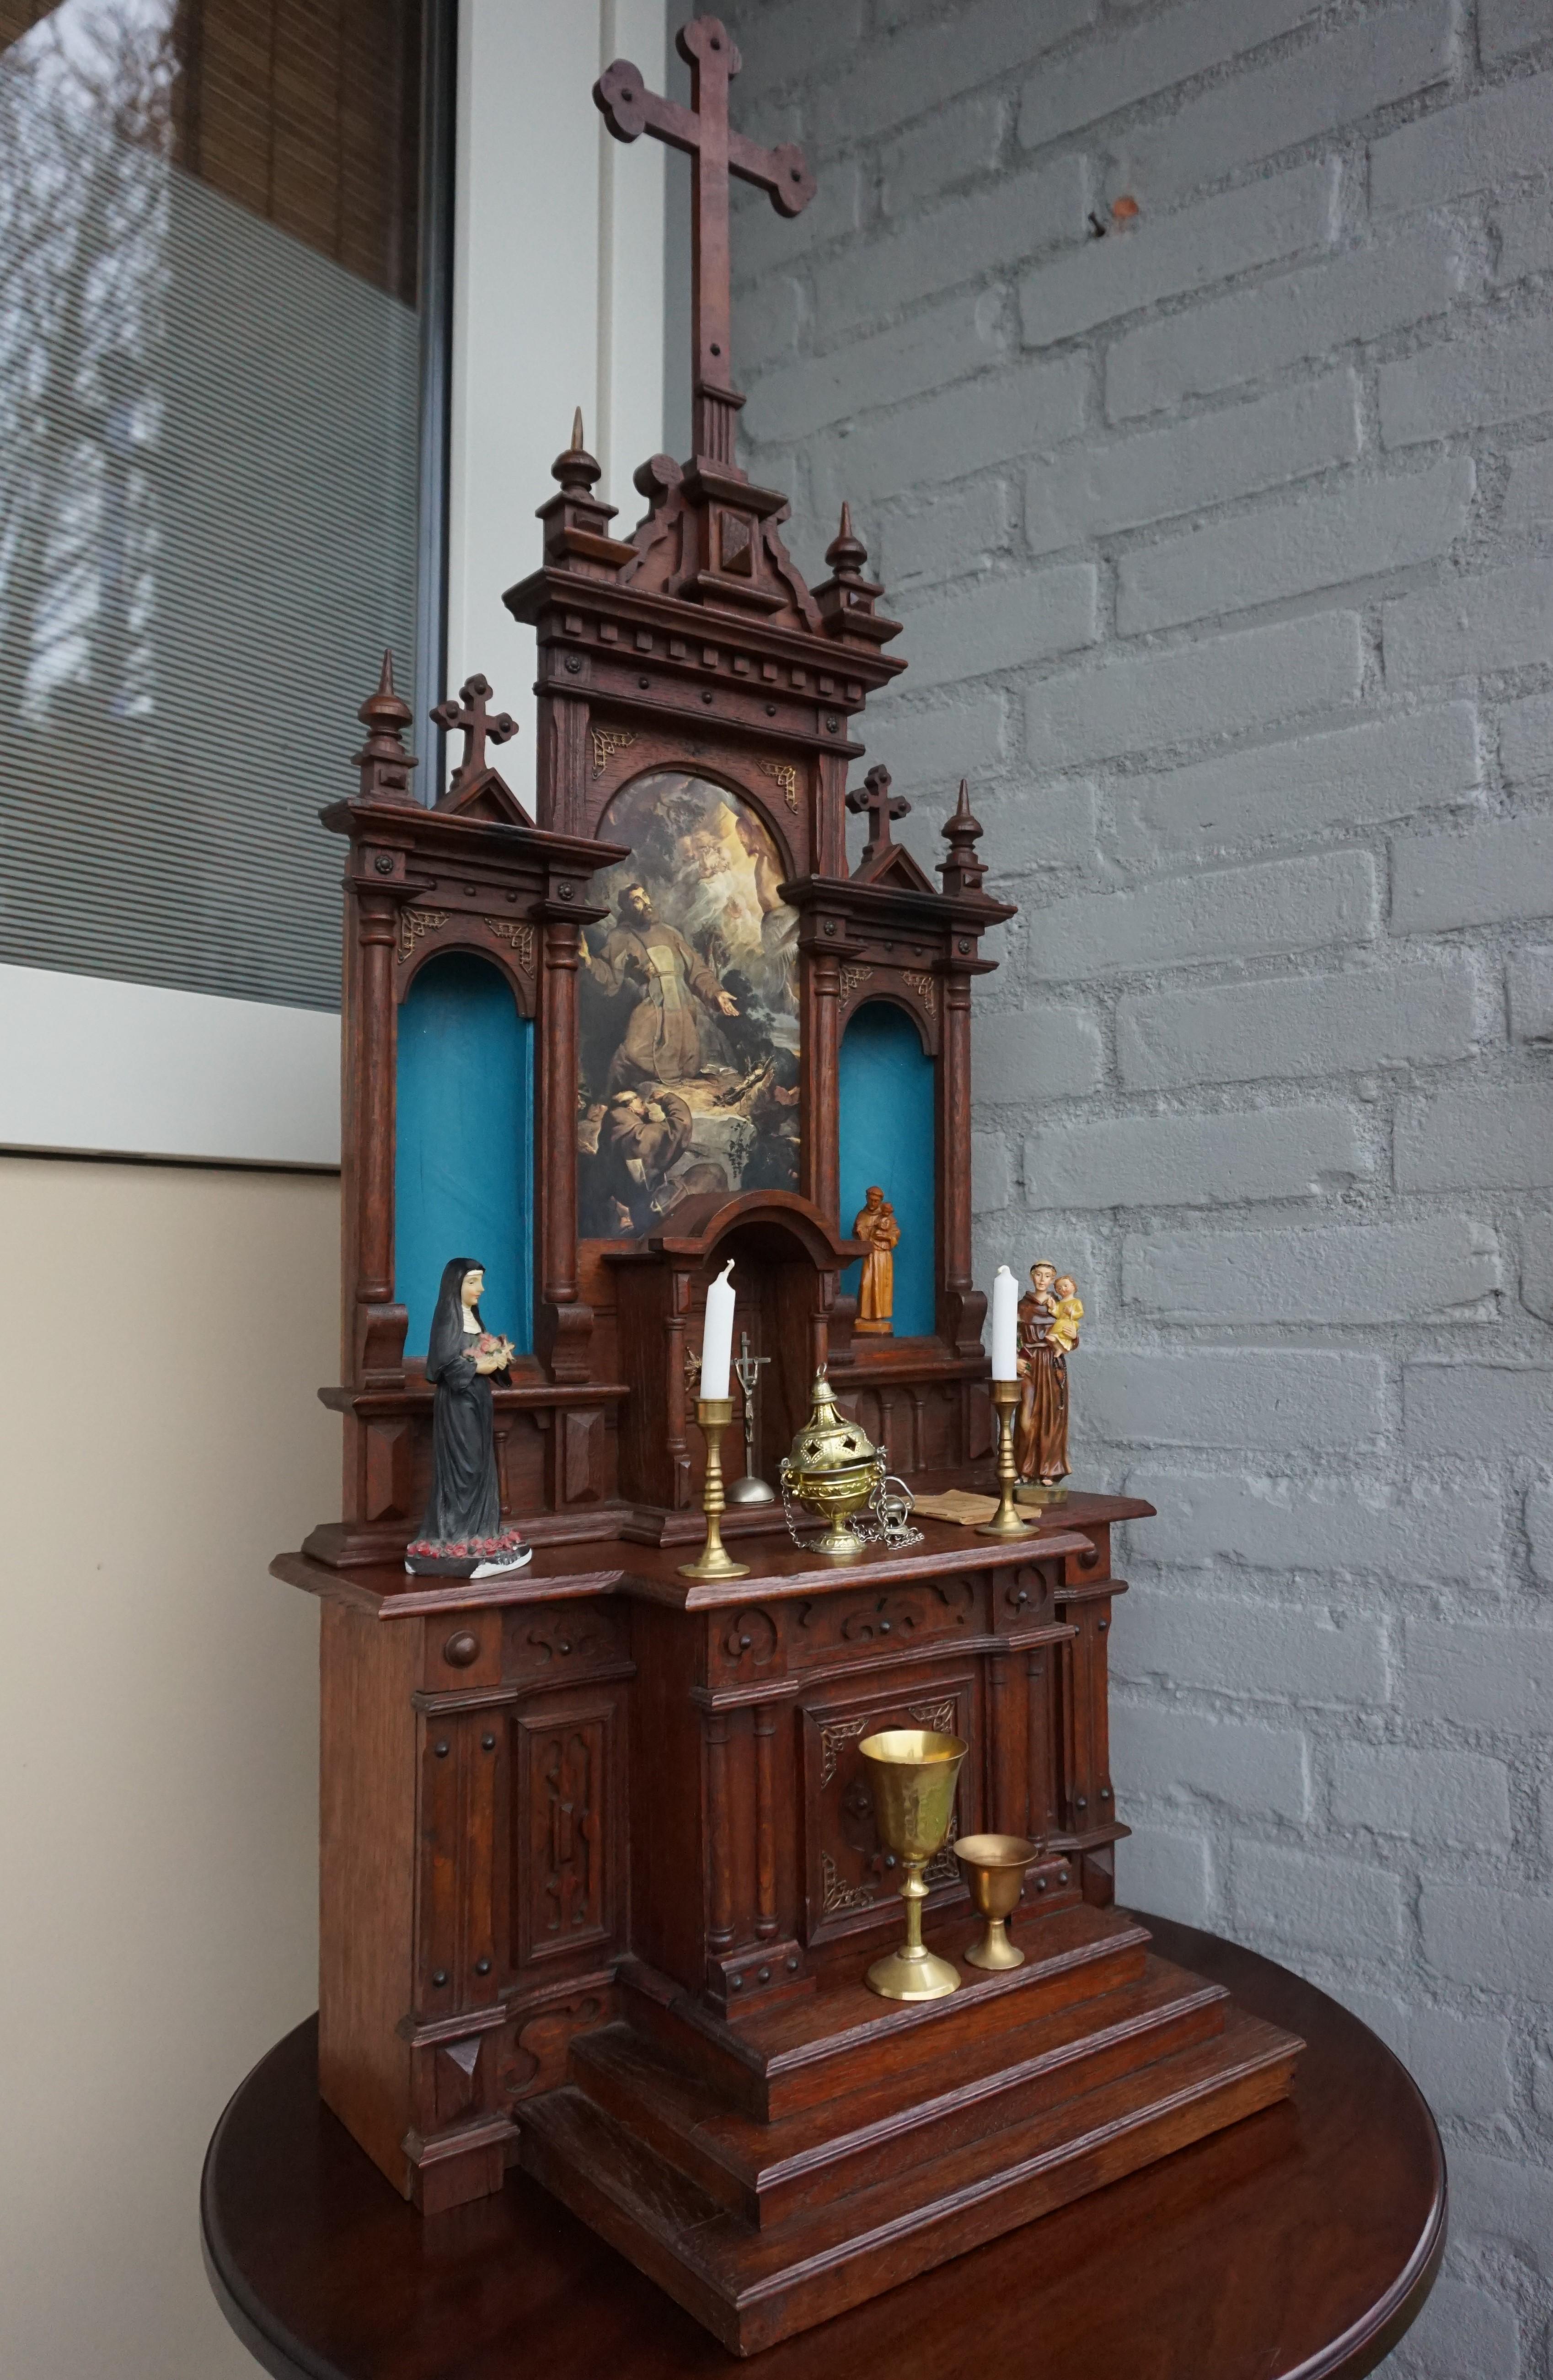 Rare and all handcrafted early 1900s miniature Gothic altar with a glorious patina.

If you are a collector of rare and good condition Gothic antiques then this three-piece miniature church altar could be yours to own and enjoy soon. The subject,